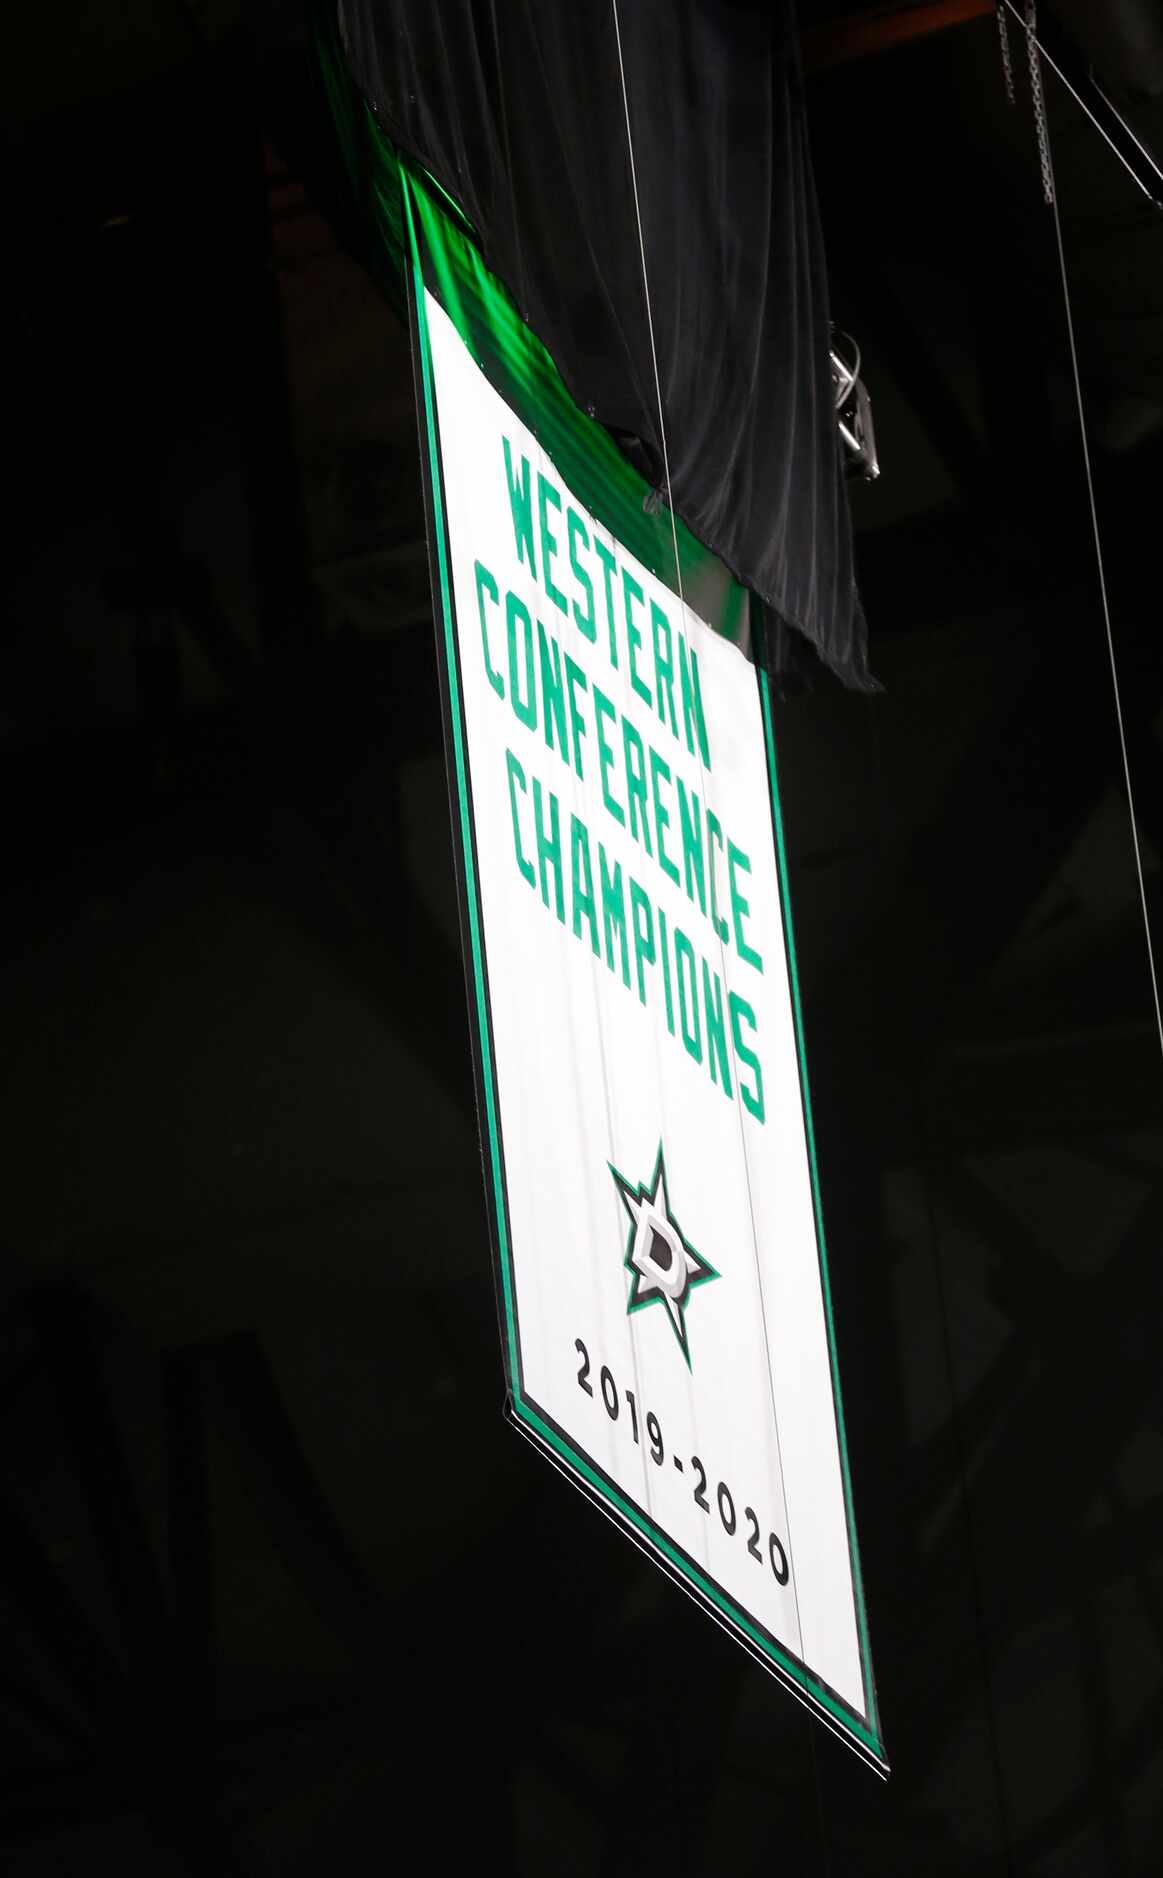 The Western Conference Champions banner is unveiled prior to the start of the game between...